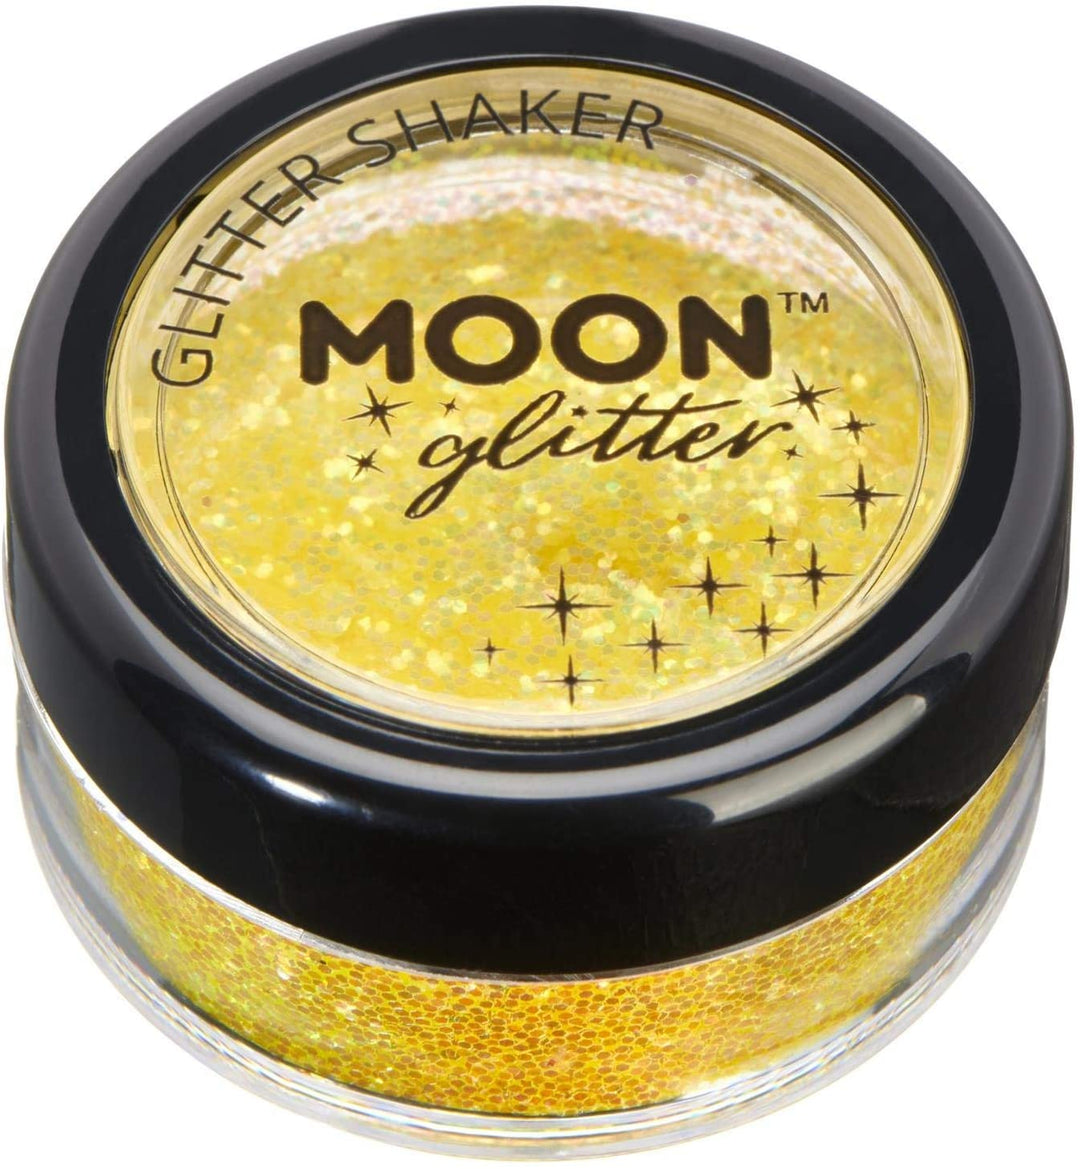 Holographic Glitter Shakers by Moon Glitter - Yellow - Cosmetic Festival Makeup Glitter for Face, Body, Nails, Hair, Lips - 5g